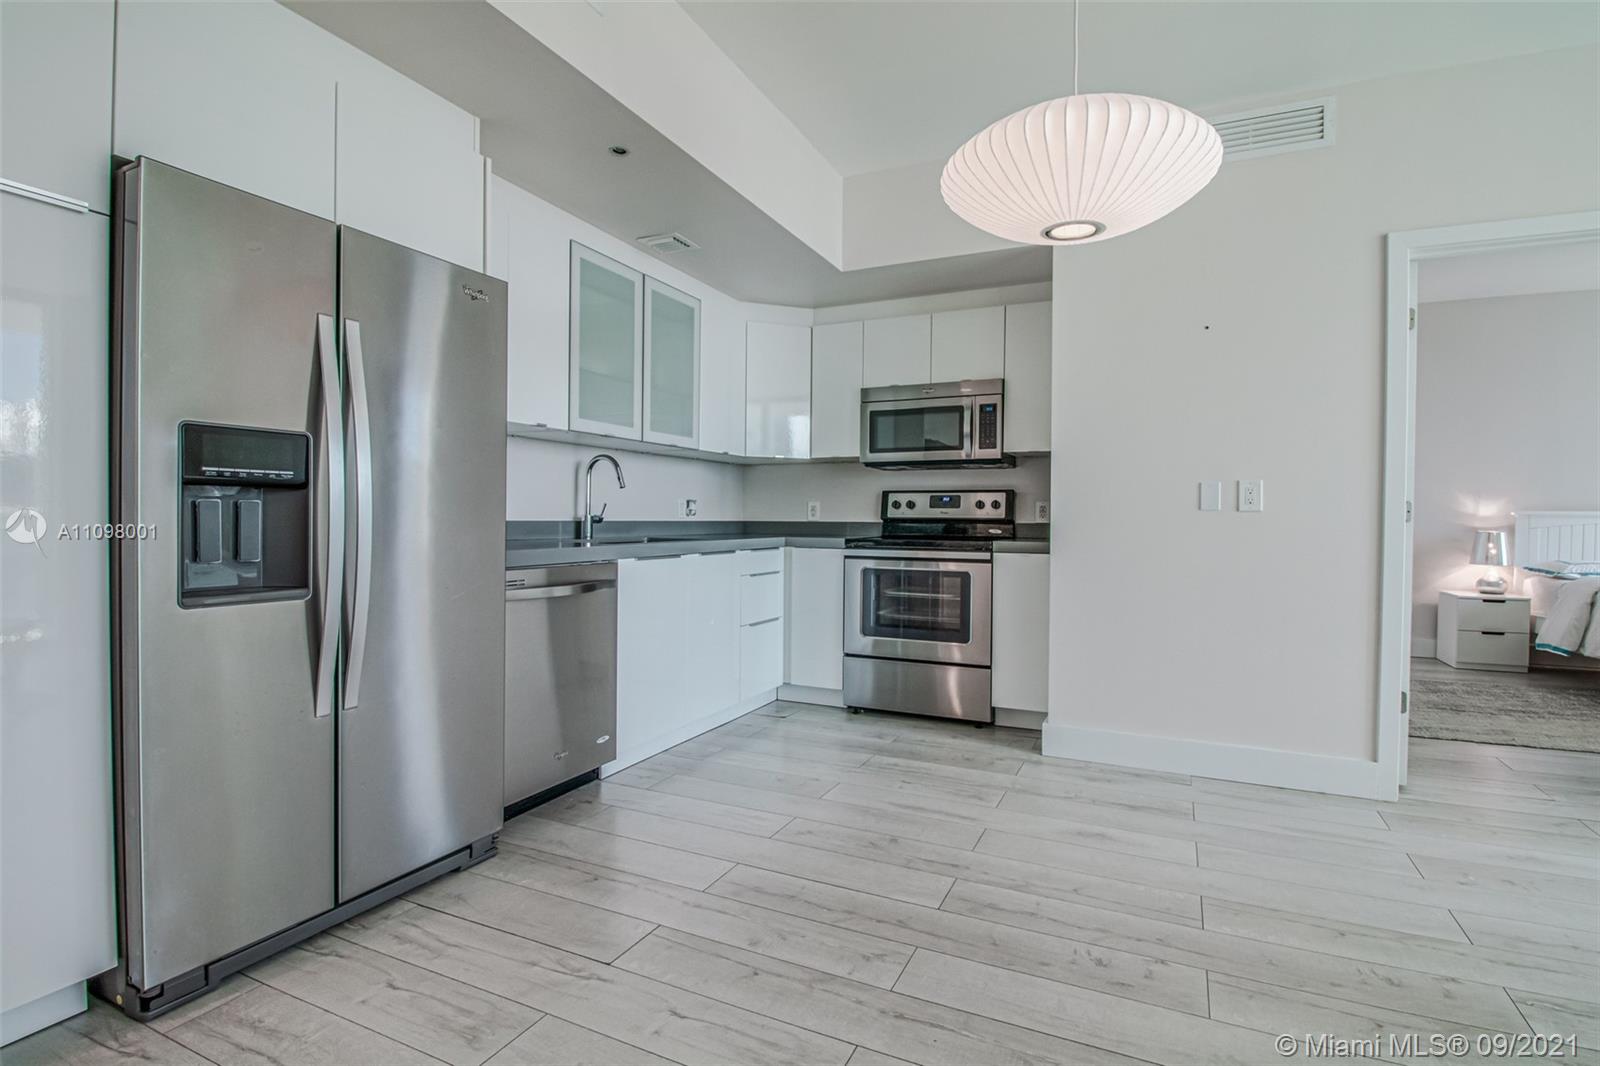 Photo 13 of Plaza On Brickell 950 Apt 3407 in Miami - MLS A11098001